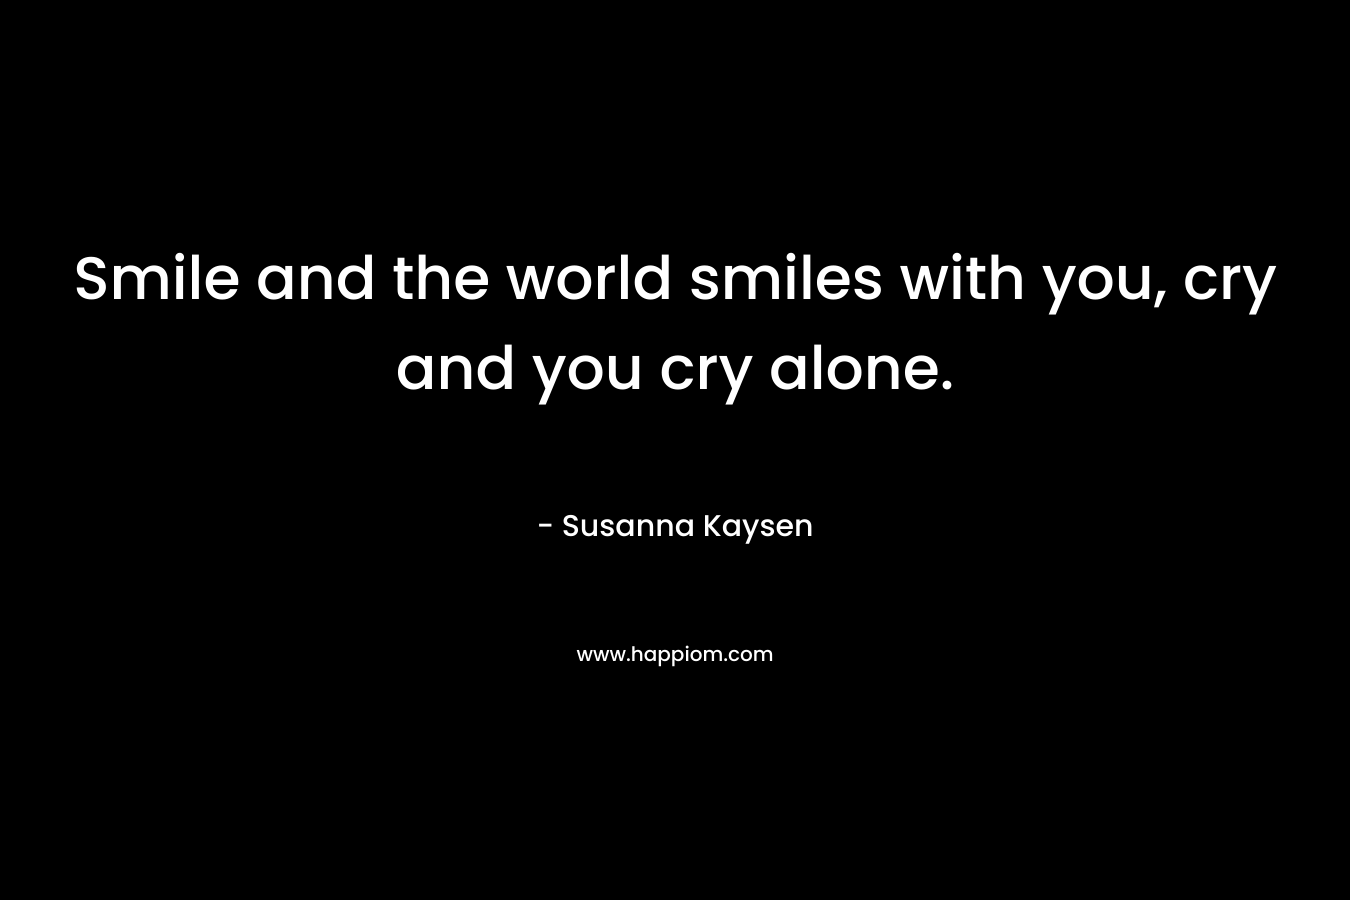 Smile and the world smiles with you, cry and you cry alone.